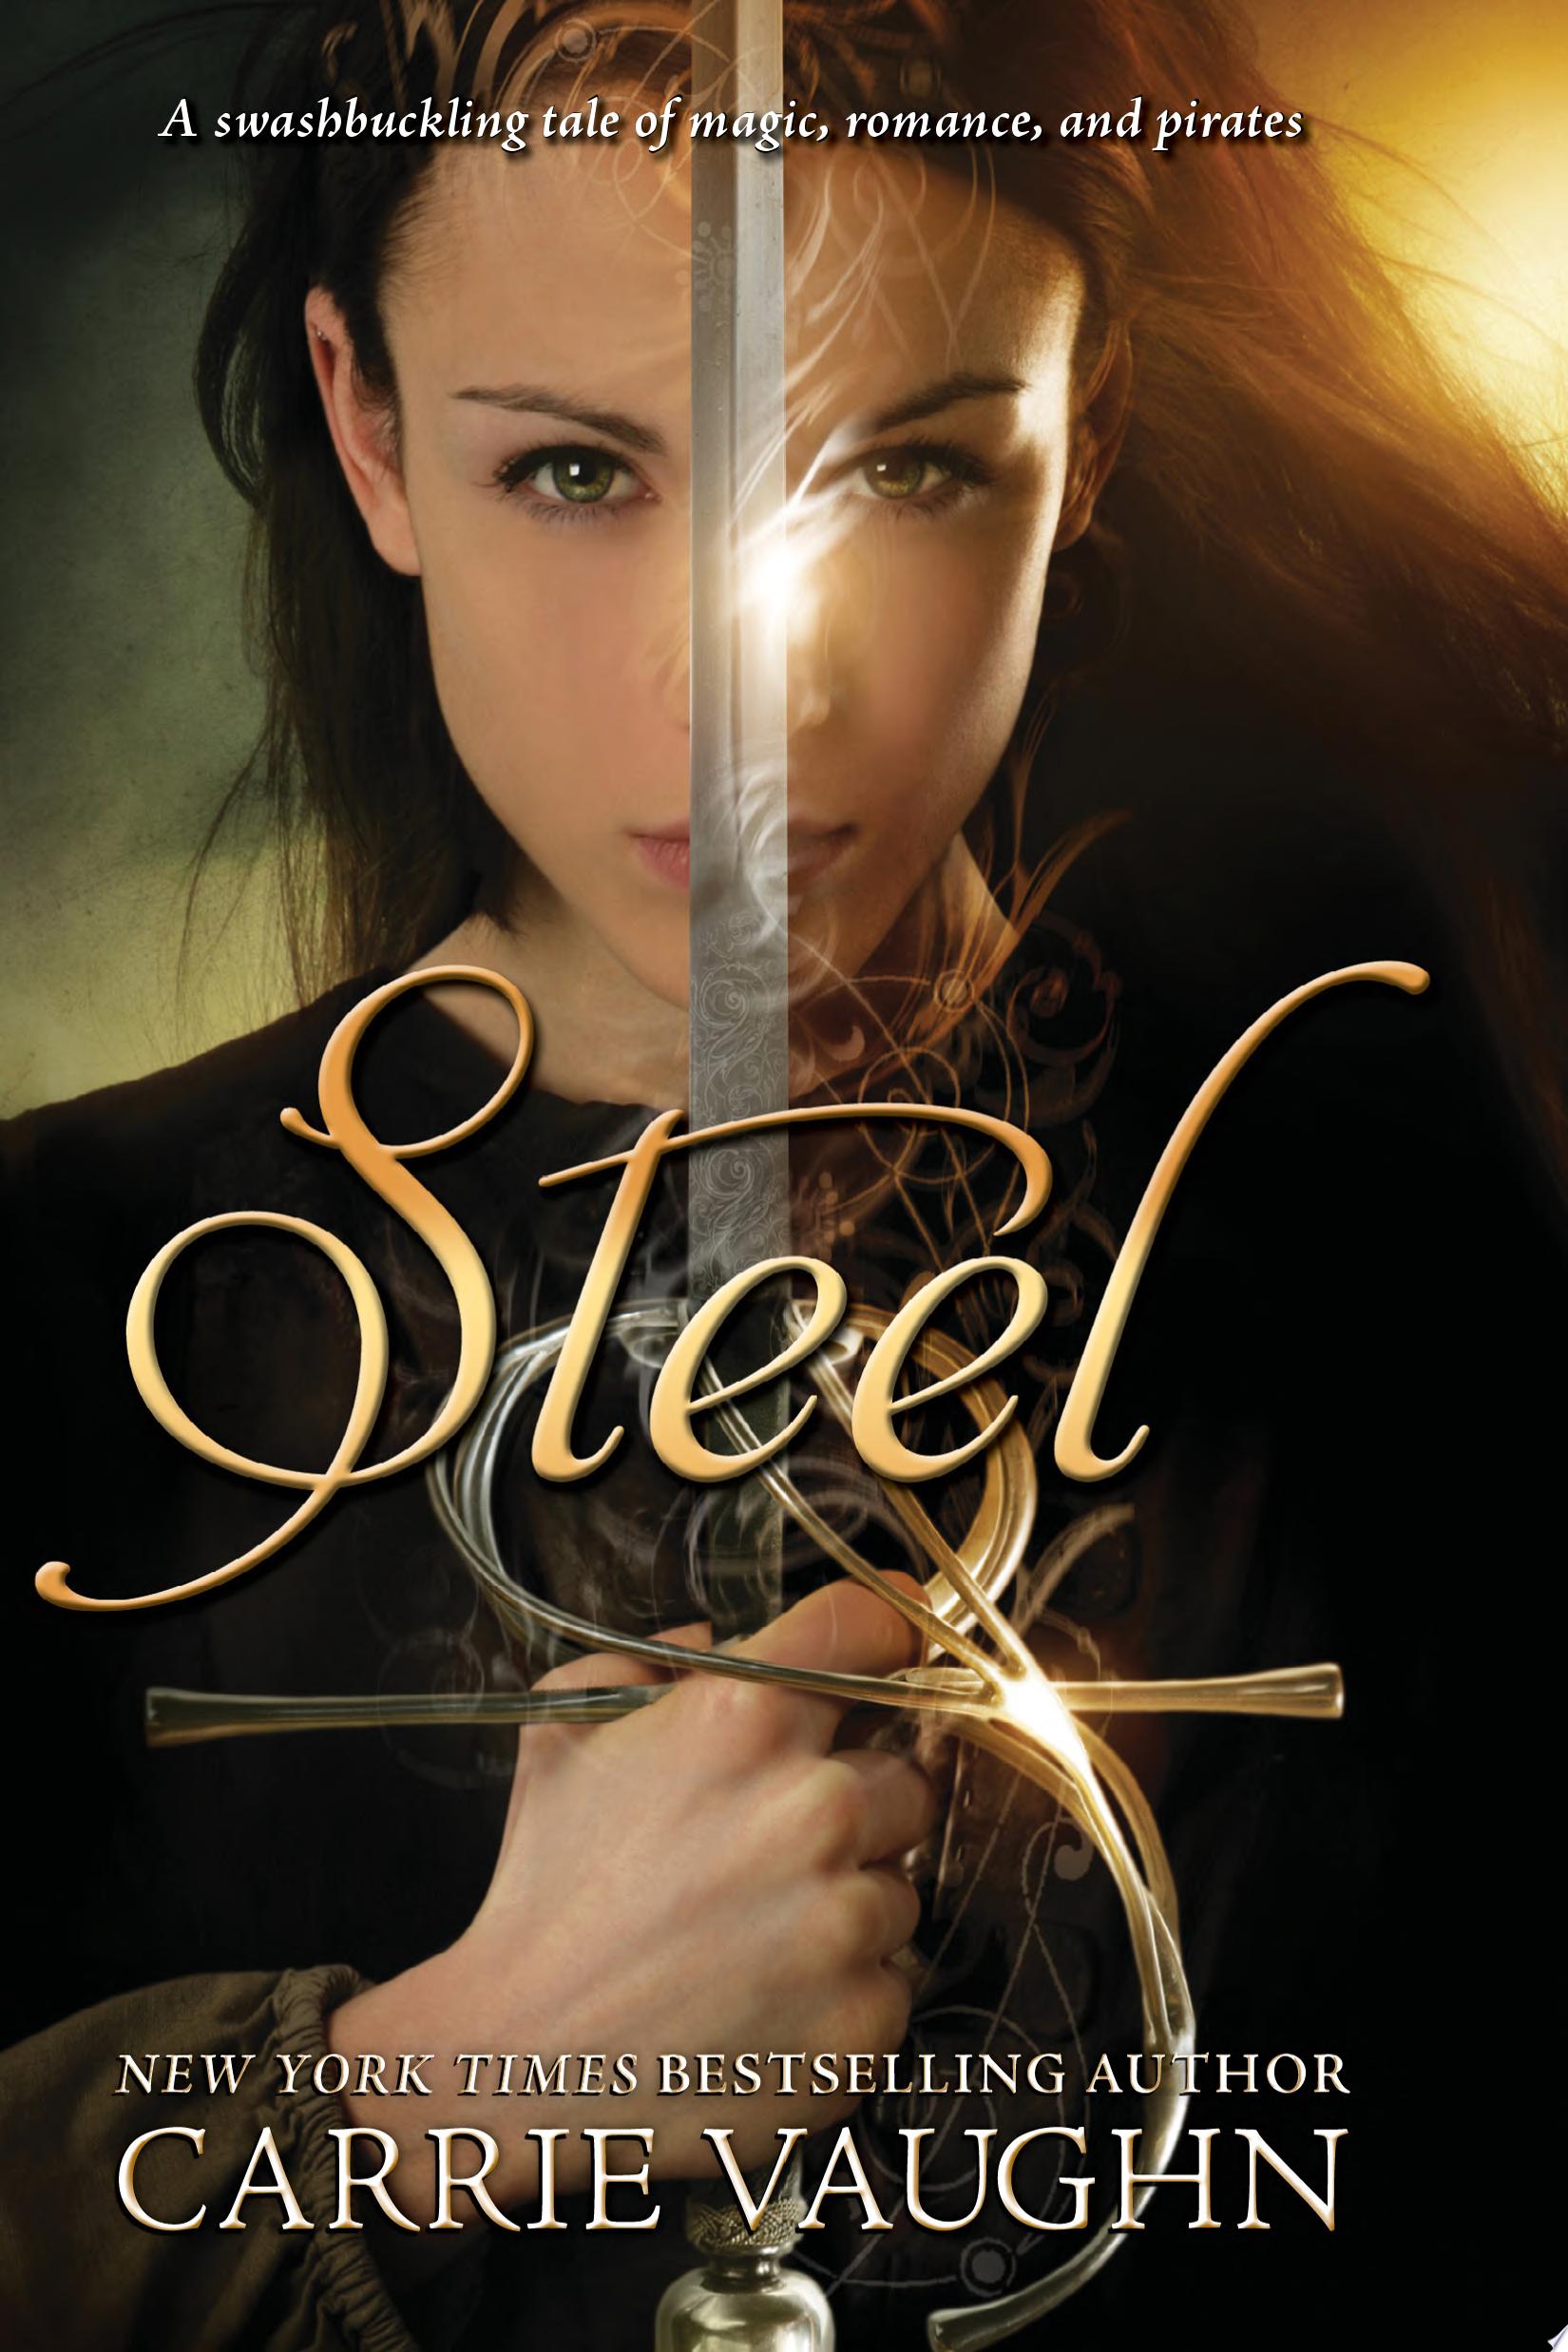 Image for "Steel"